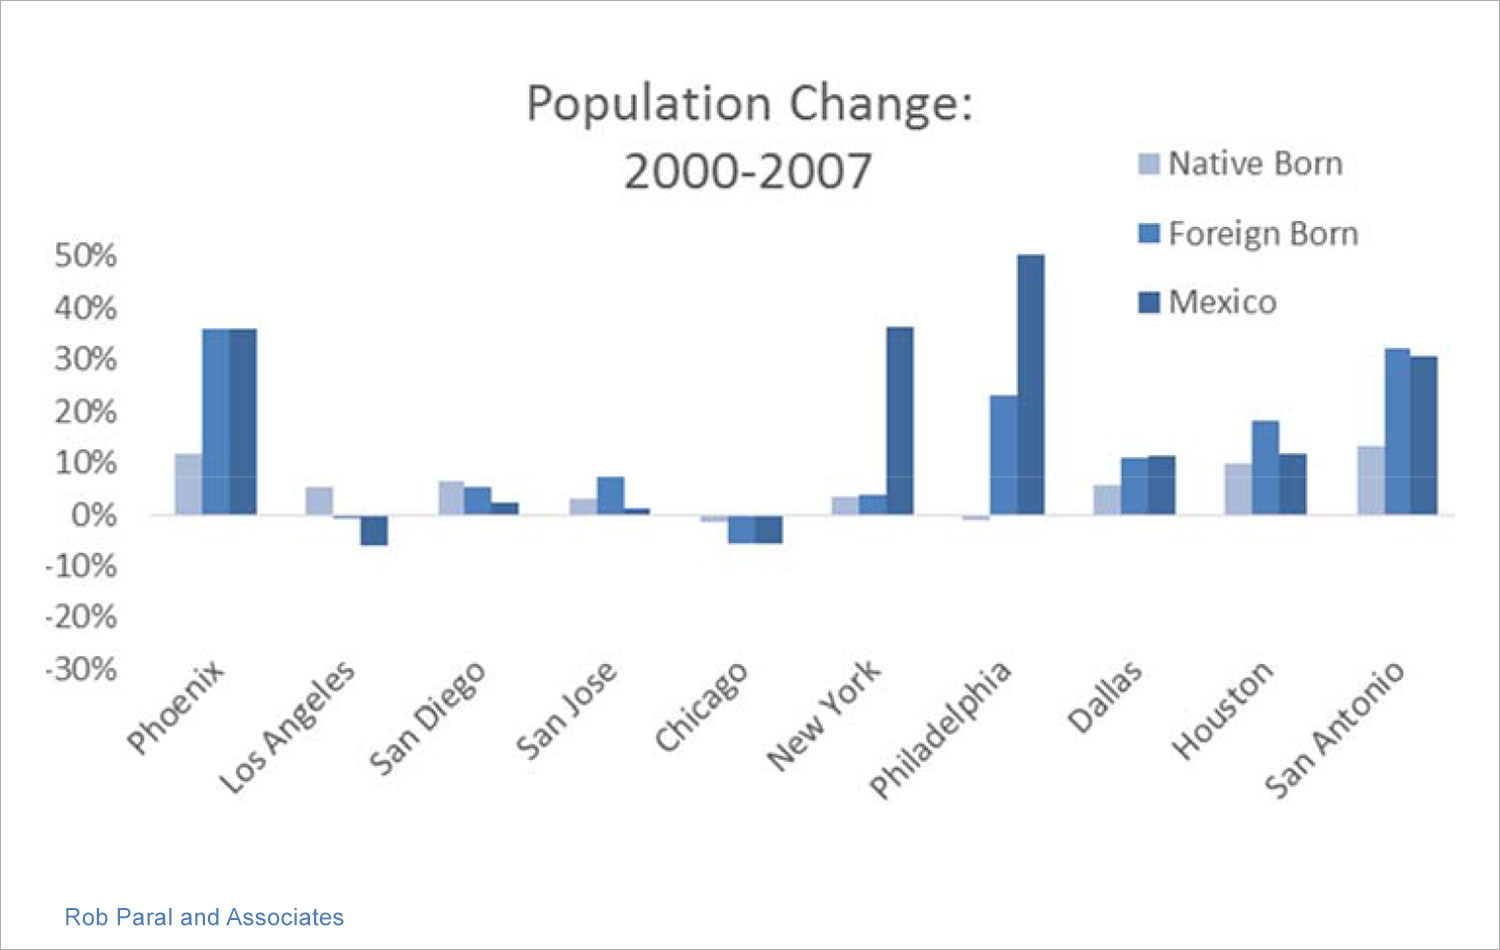 Bar graph showing population change from 2000 - 2007